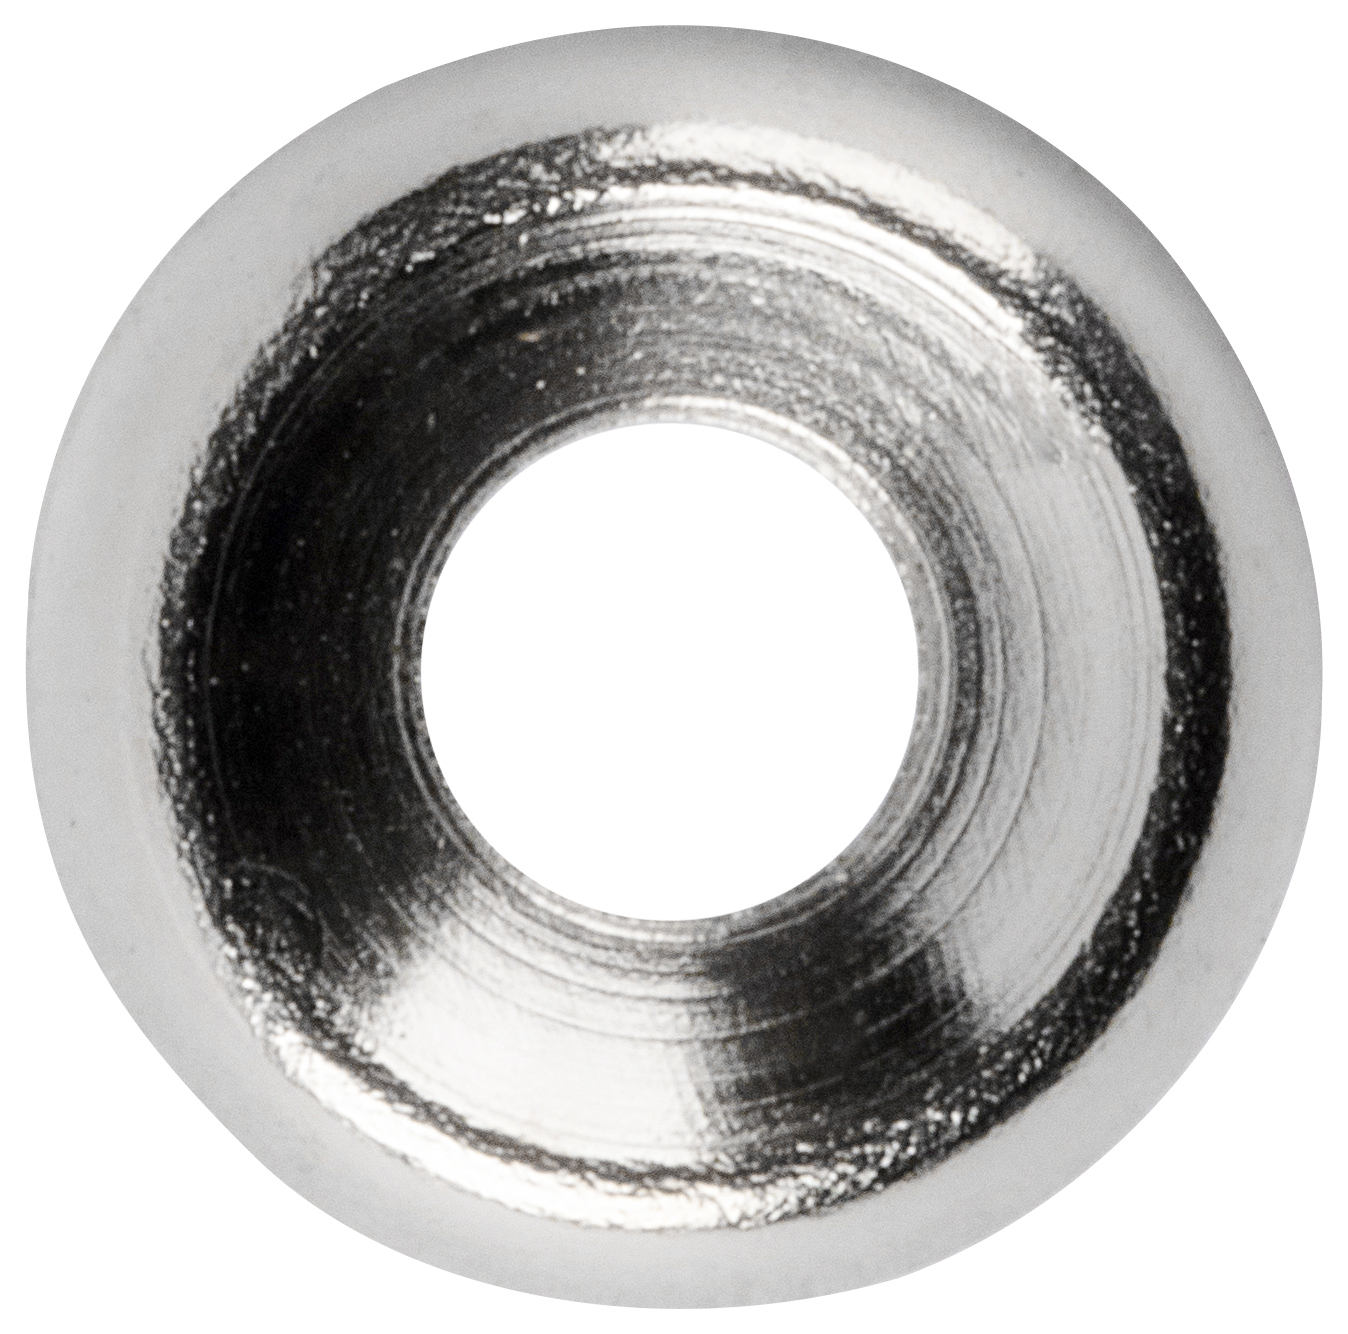 Wickes Nickel Plated Screw Cup Washers - 3.5mm - Pack of 50